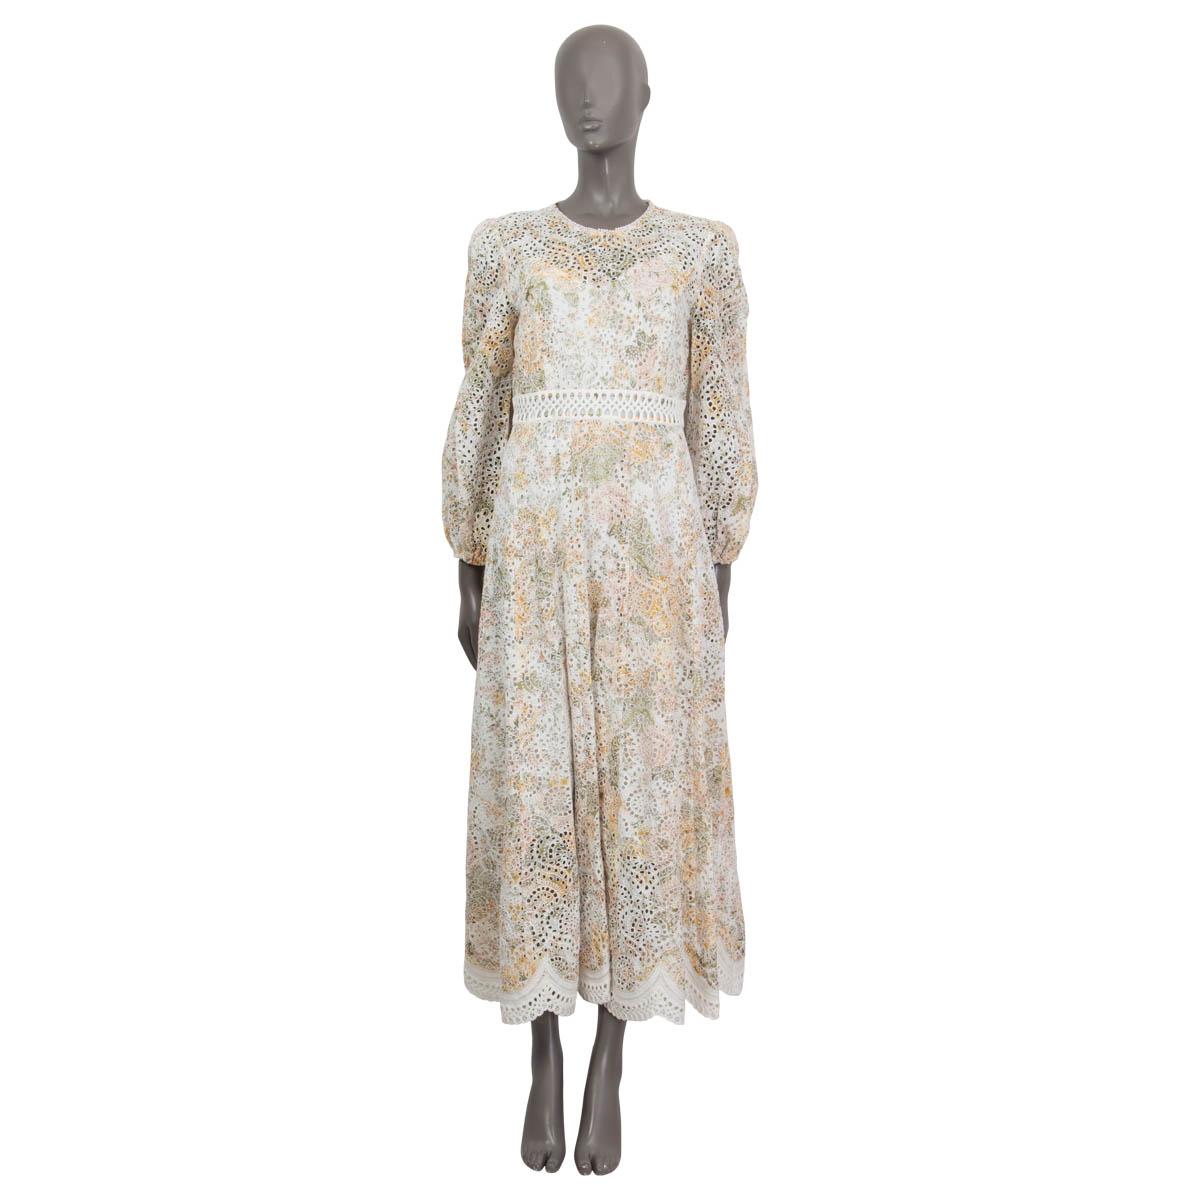 100% authentic Zimmermann cut out detailed dress in off-white, pale green, pale pink and pale orange linen (100%). Features long sleeves, a lace embroidered hemline and a floral print. Opens with a zipper and a hook on the back. Comes with a